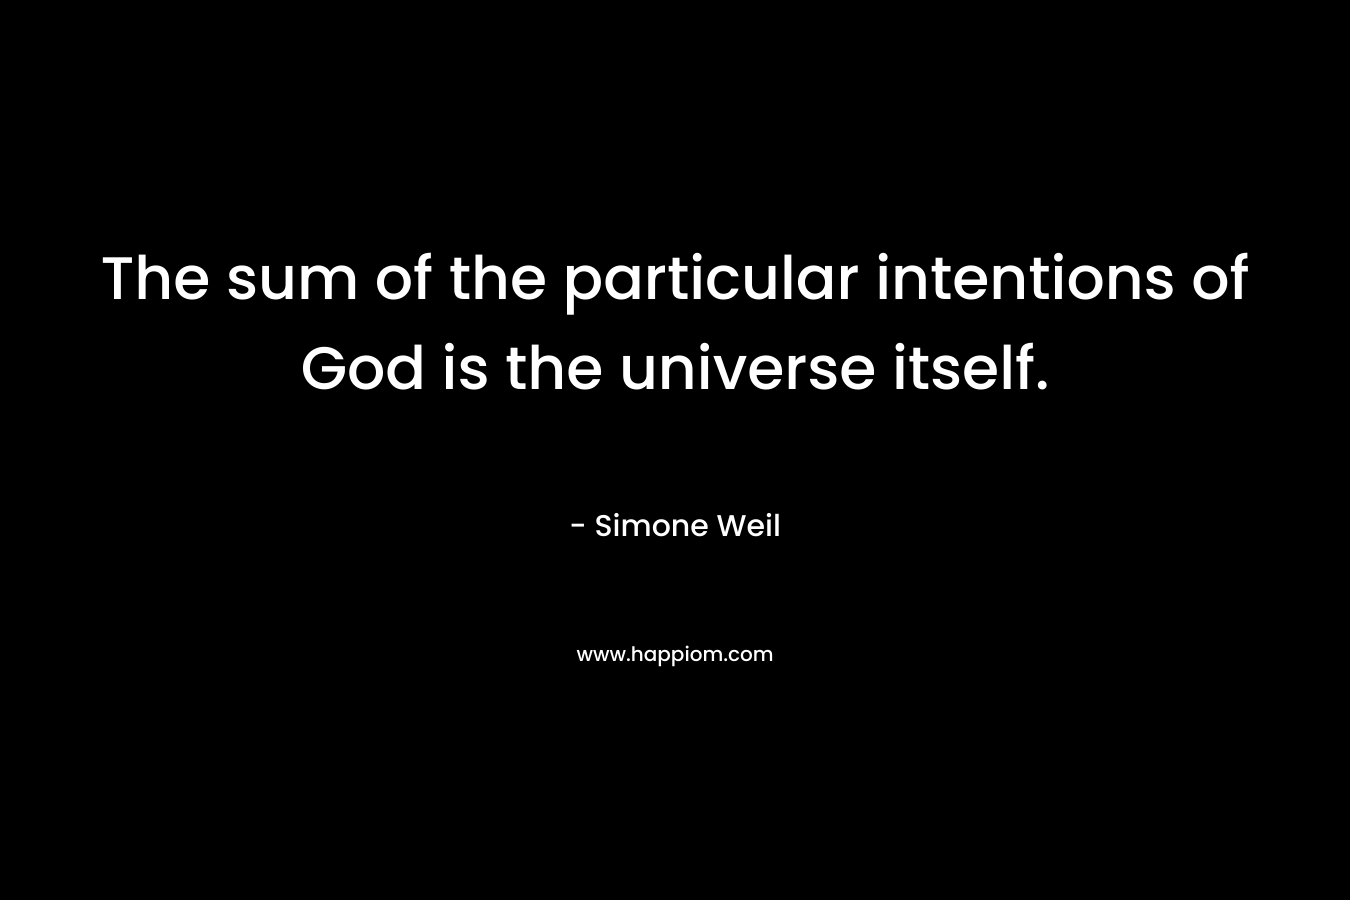 The sum of the particular intentions of God is the universe itself.